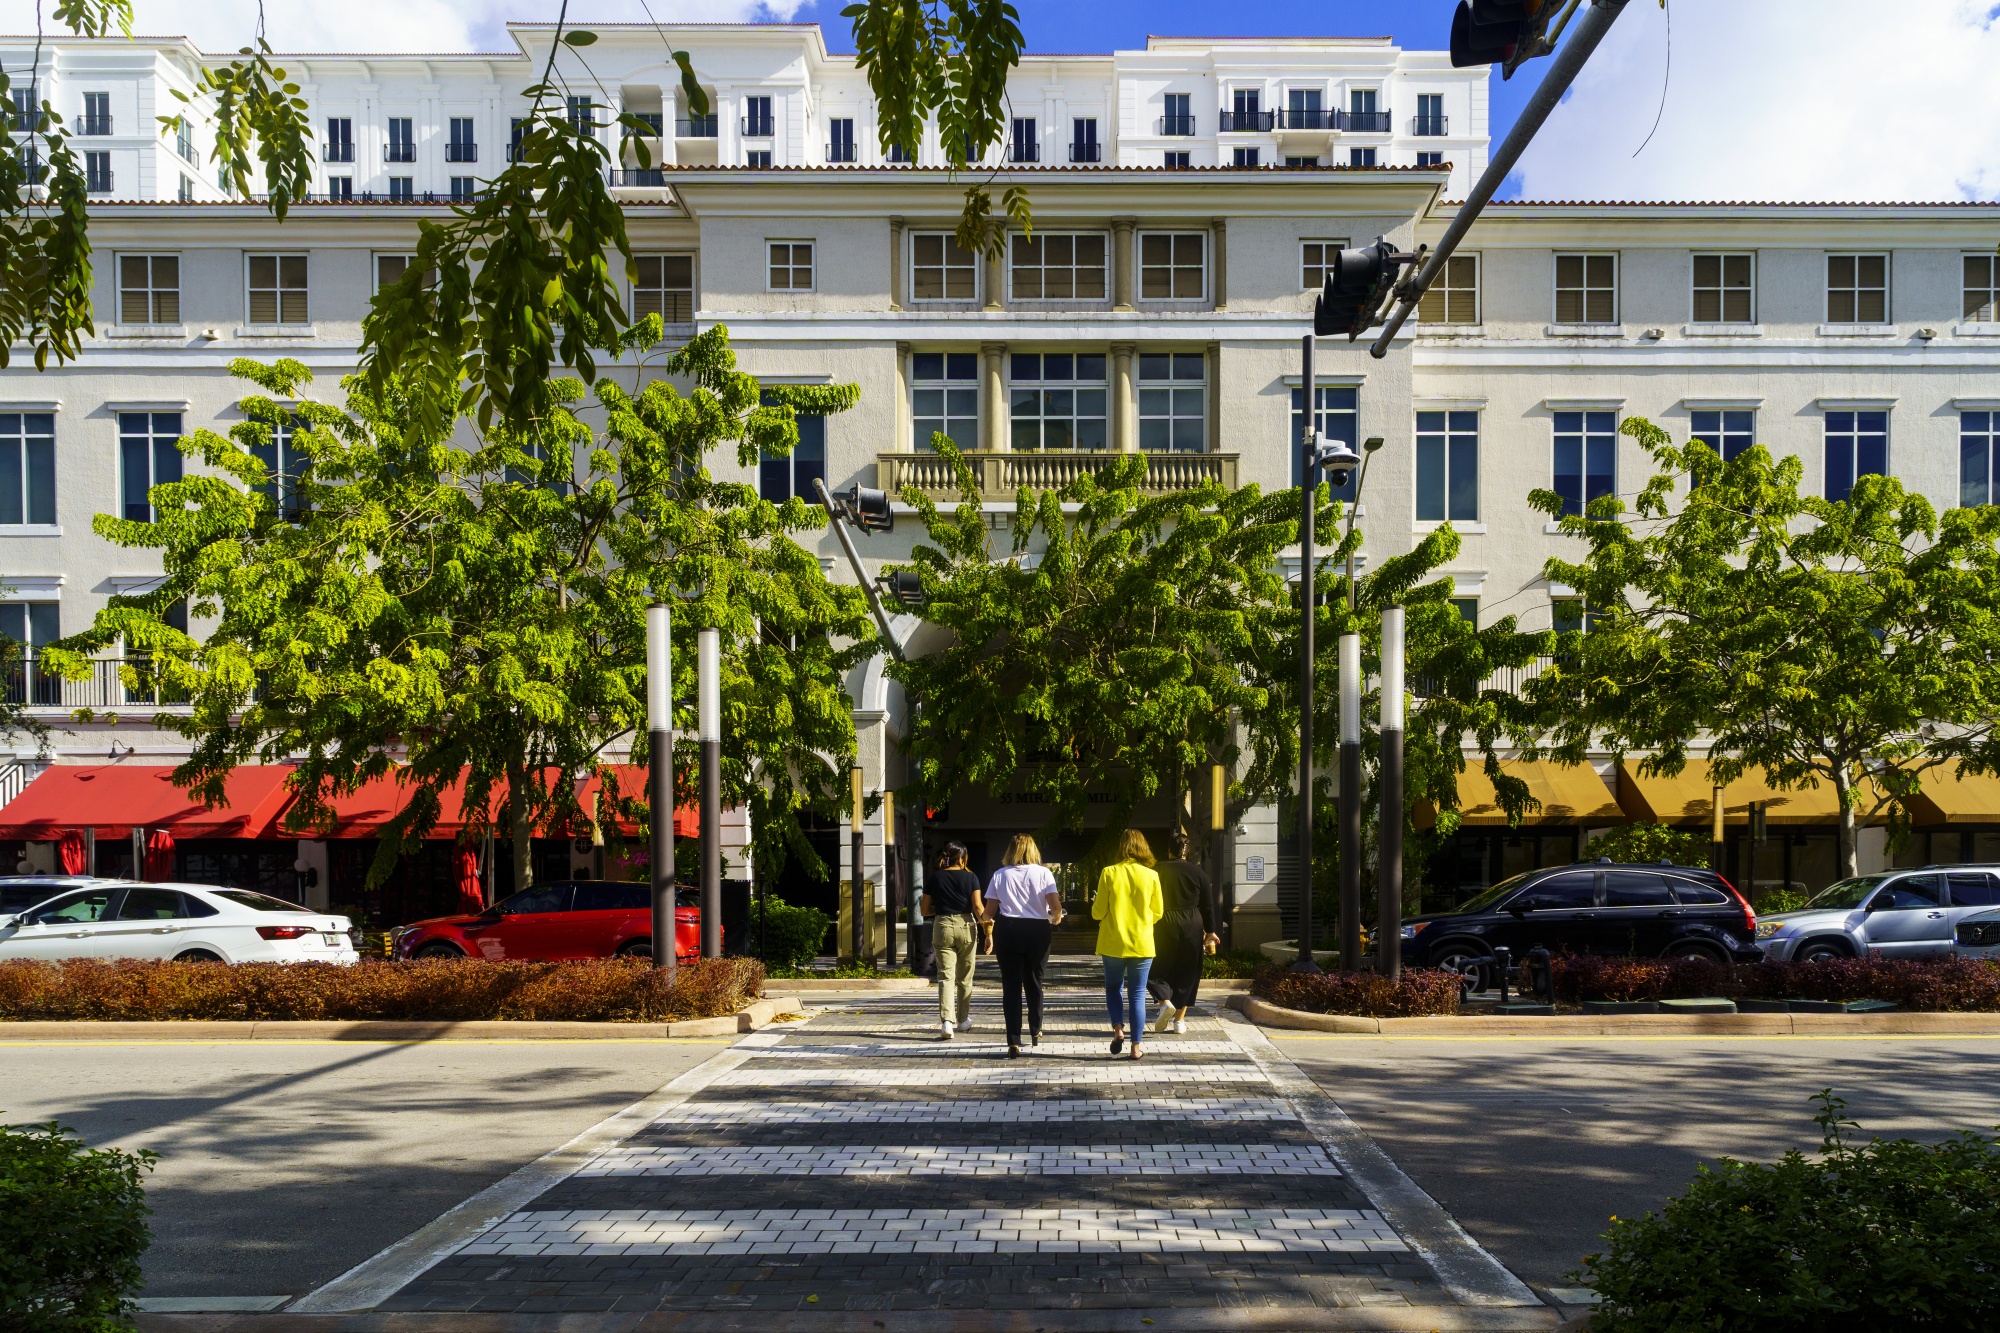 The Miracle Mile Coral Gables shopping district in downtown Coral Gables, Florida.